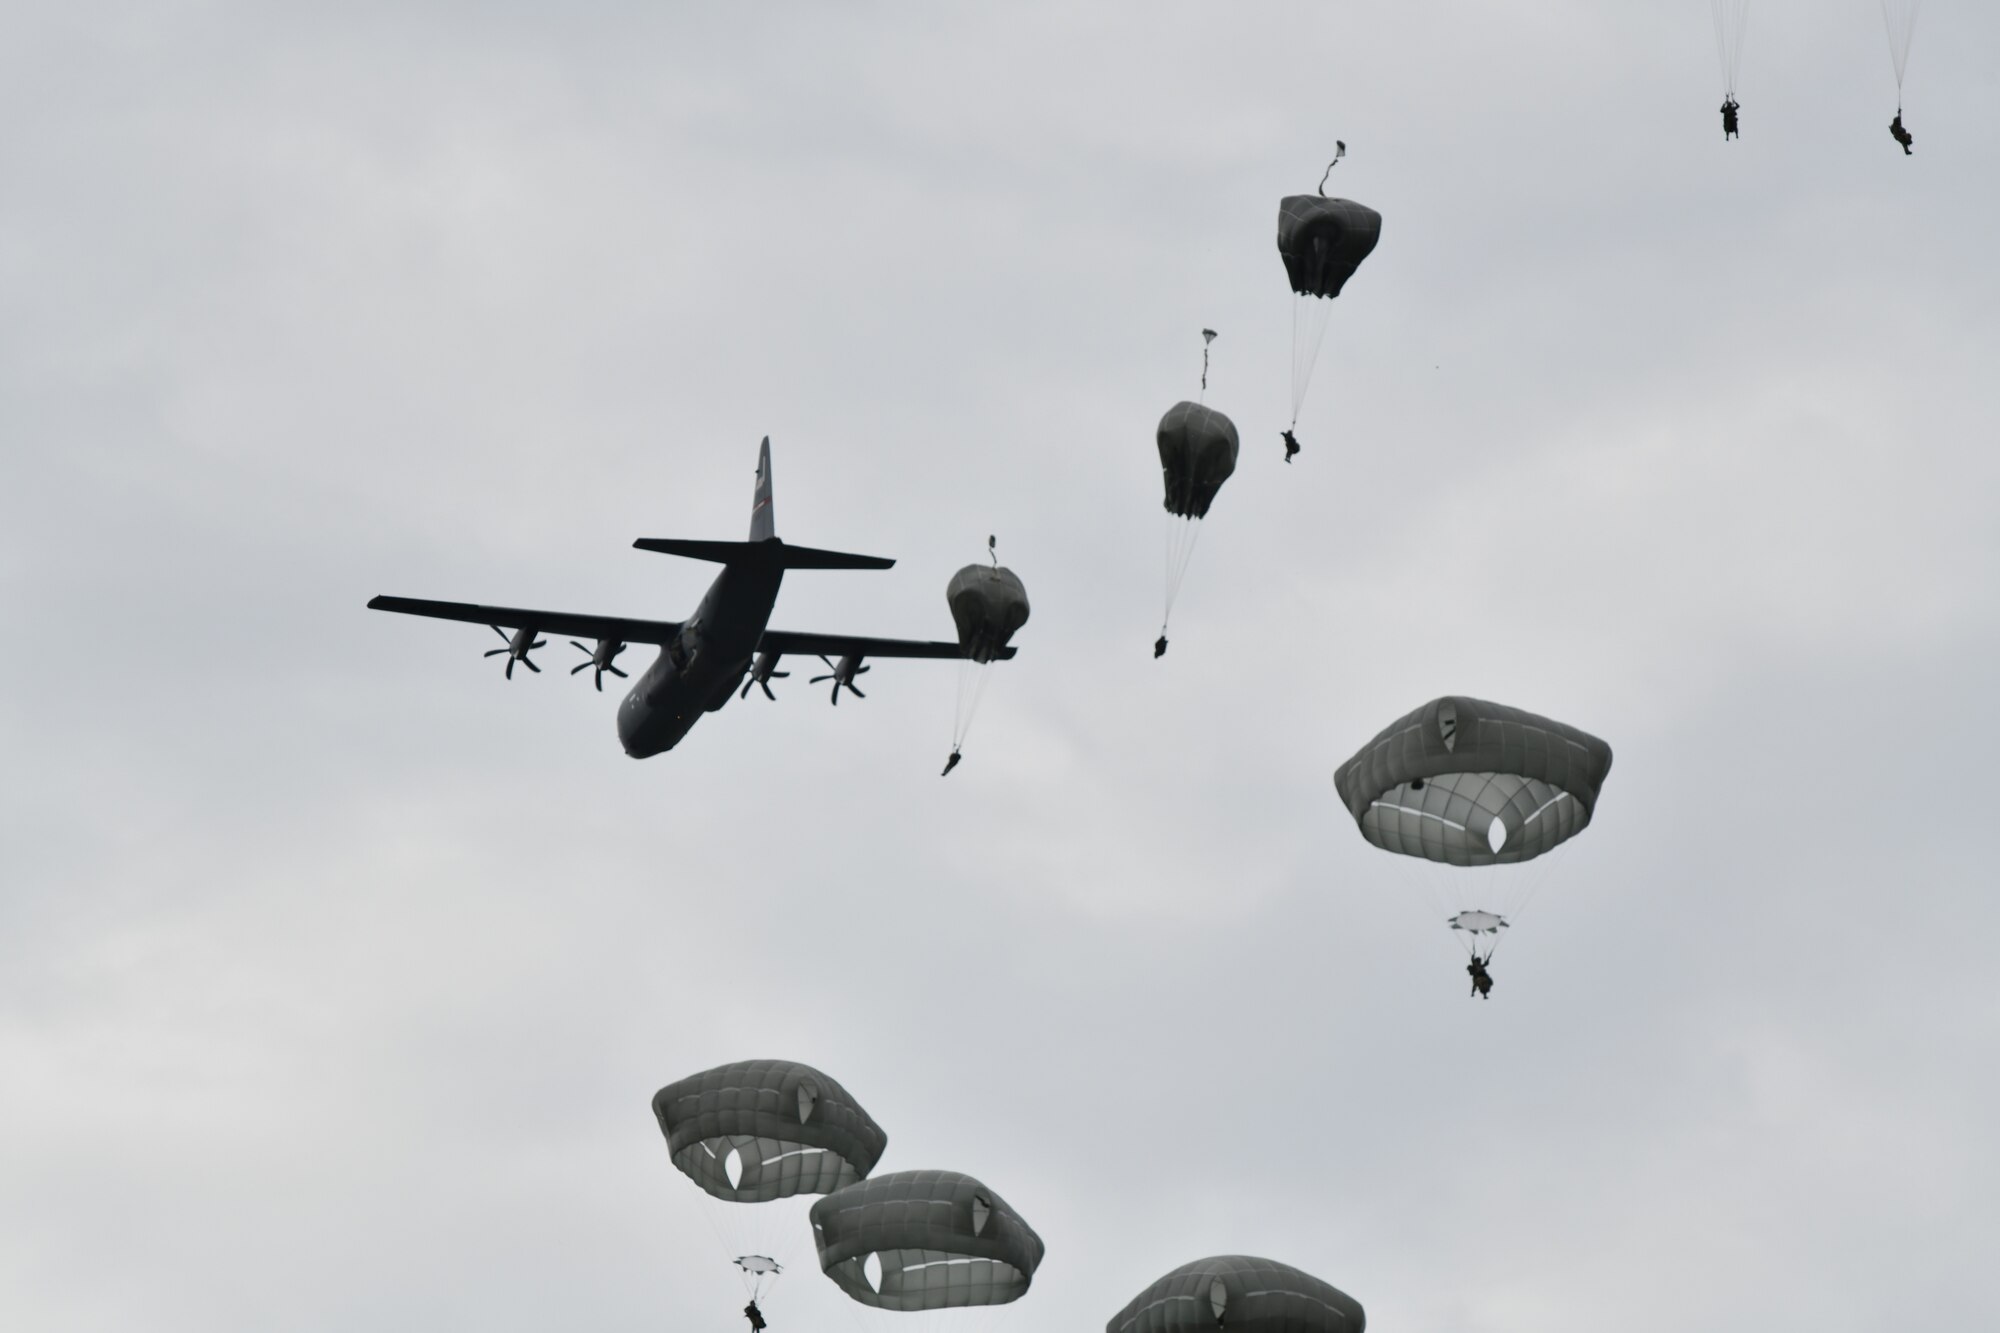 The 815th Airlift Squadron, or Flying Jennies, provided airdrop support for more than 1300 paratroopers from the 4th Infantry Brigade Combat Team Airborne, 25th Infantry Division for their jumps during a training exercise at Joint Base Elmendorf-Richardson, Alaska, July 13-16, 2021. They also dropped over 30,000 pounds of heavy equipment, completed more than eight hours of low-level tactical flight and more than 15 assault landings during the four-day training exercise. (U.S. Air Force photo by Master Sgt. Jessica Kendziorek)